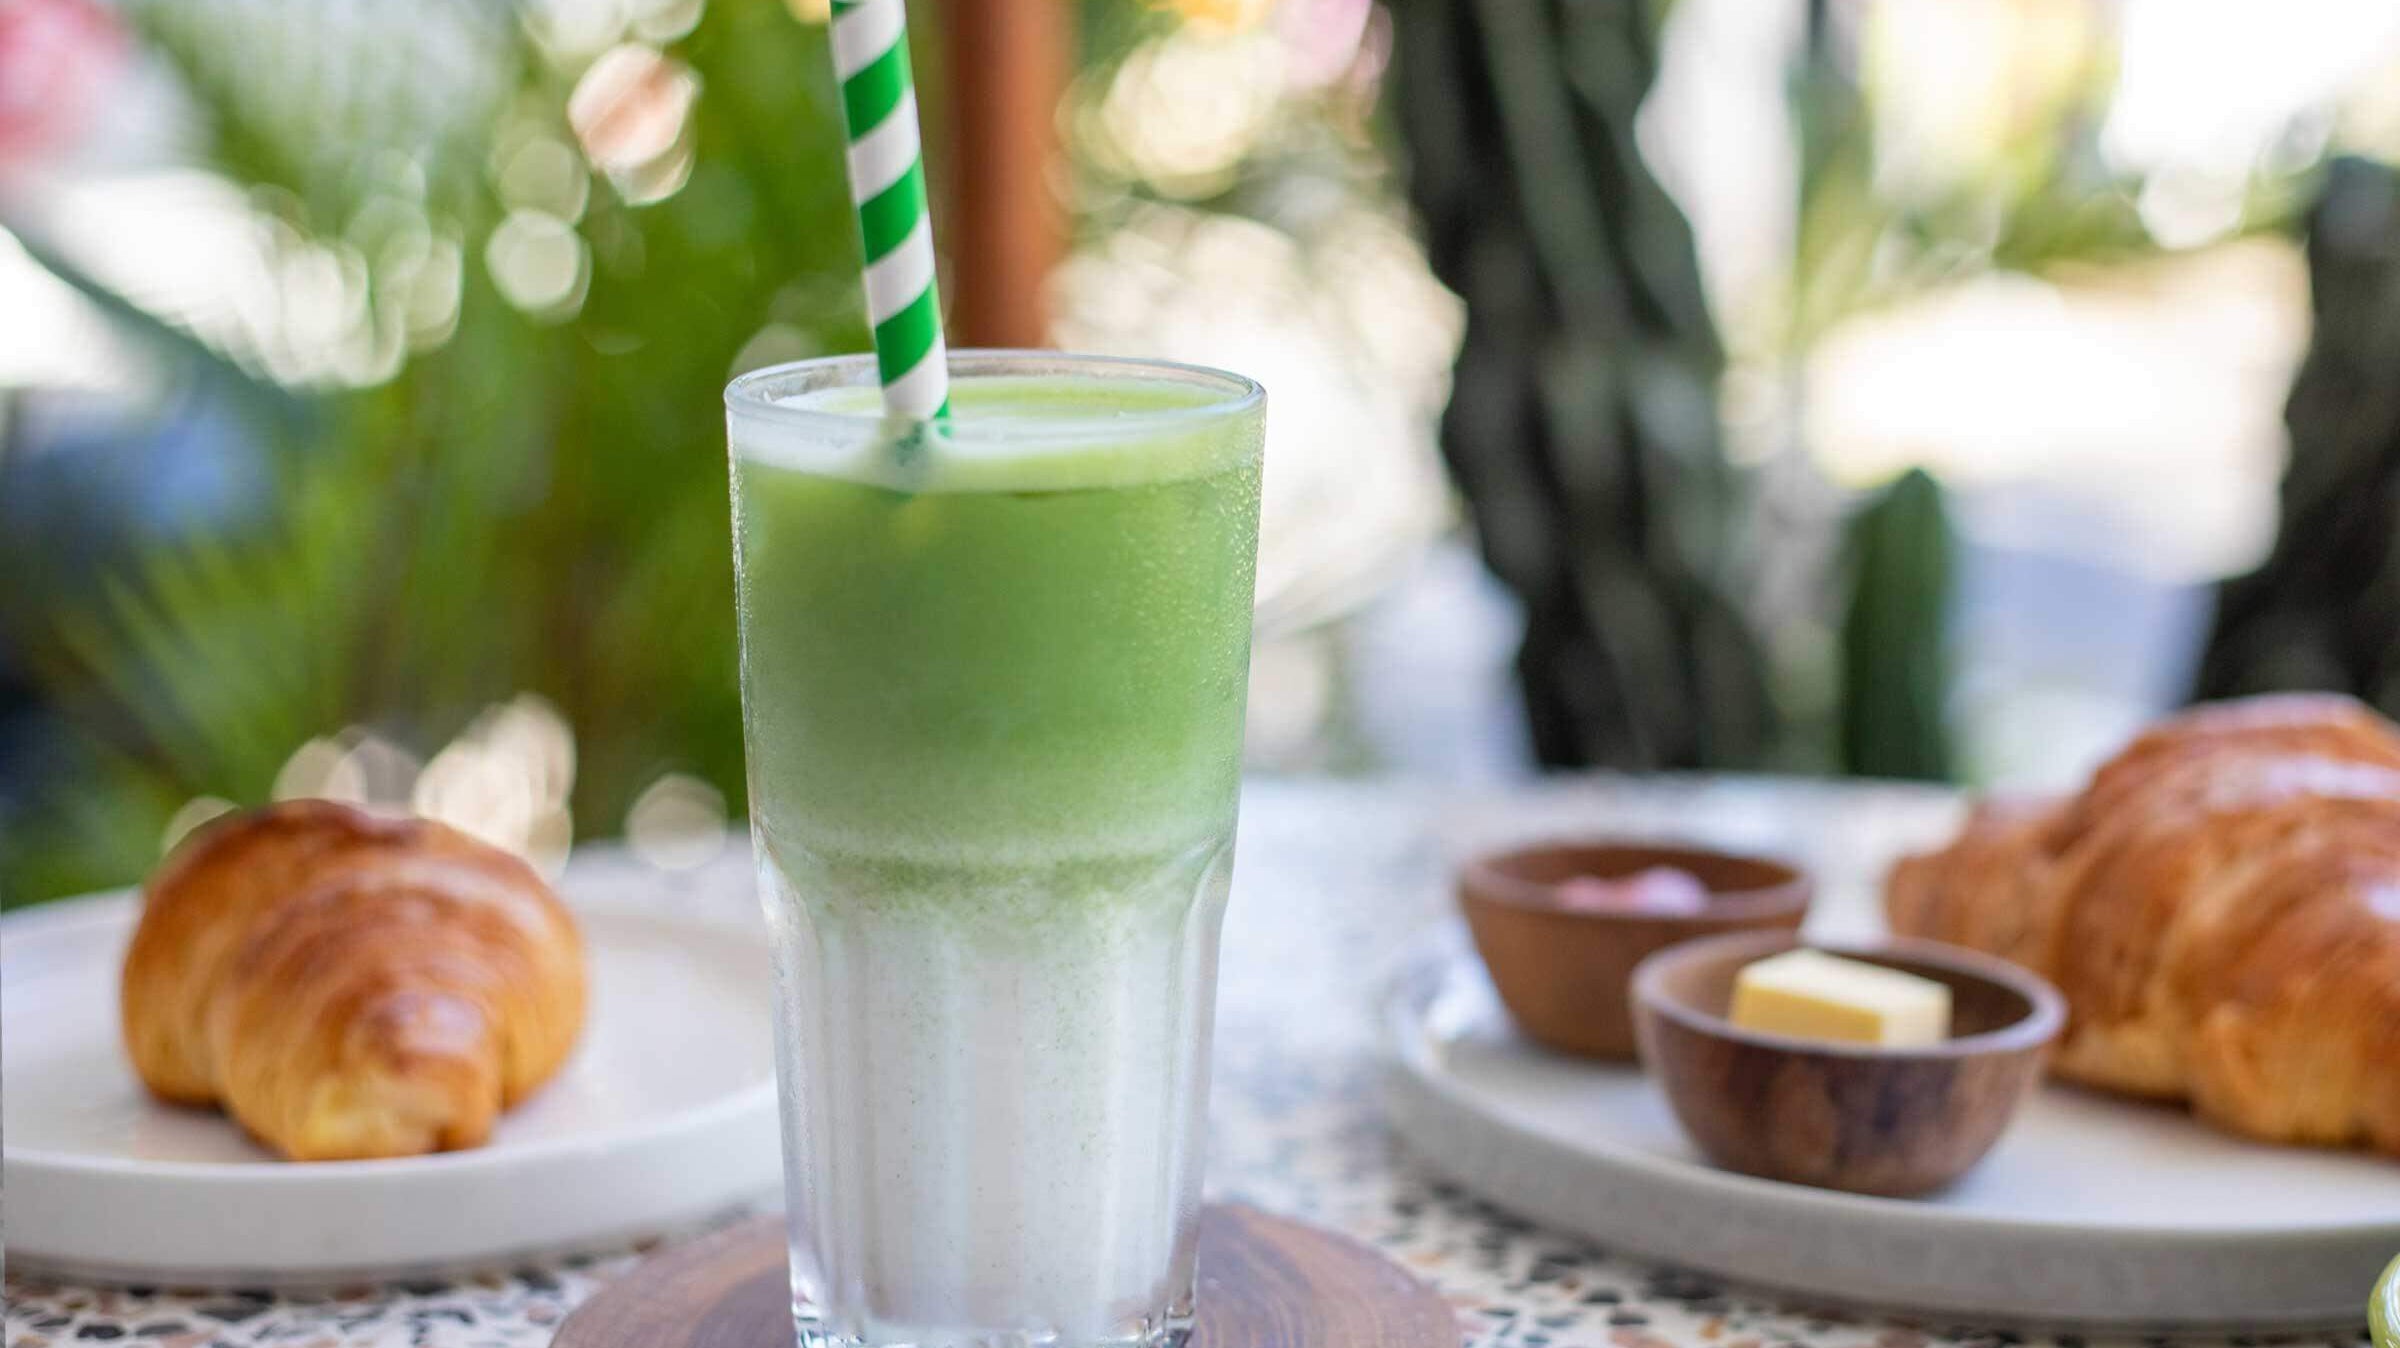 Iced matcha latte recipe with natural ingredients